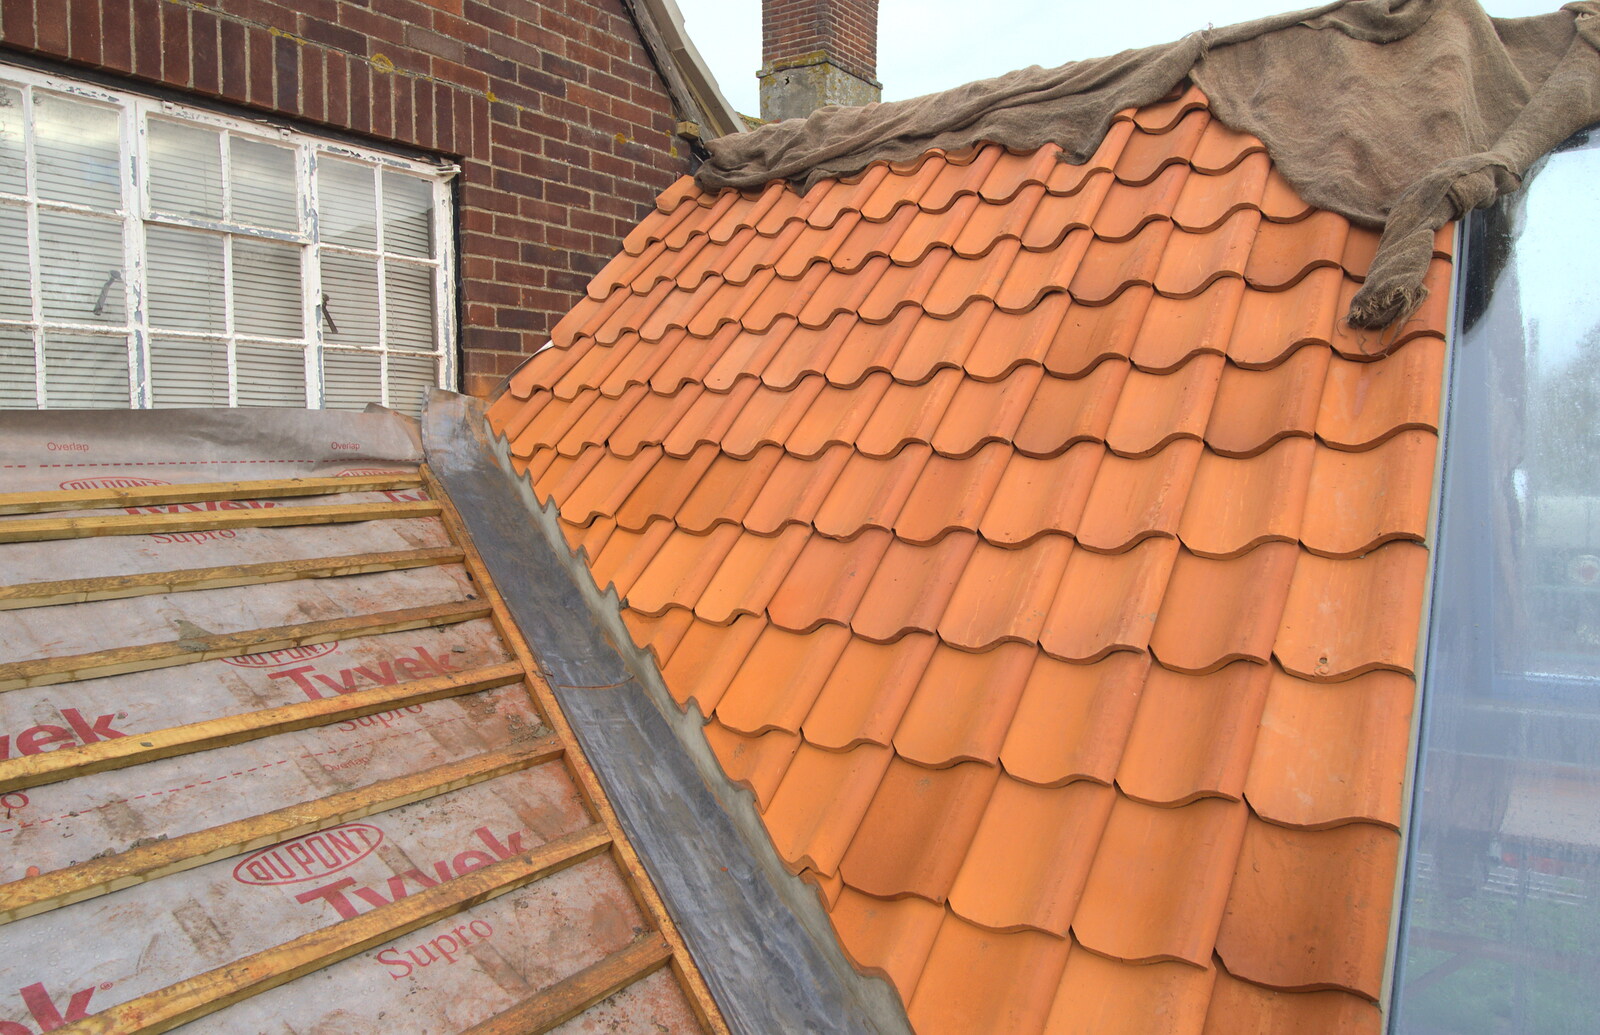 More Building and Palgrave Playground, Suffolk - 24th November 2013: Nice new tiles on the conservatory roof